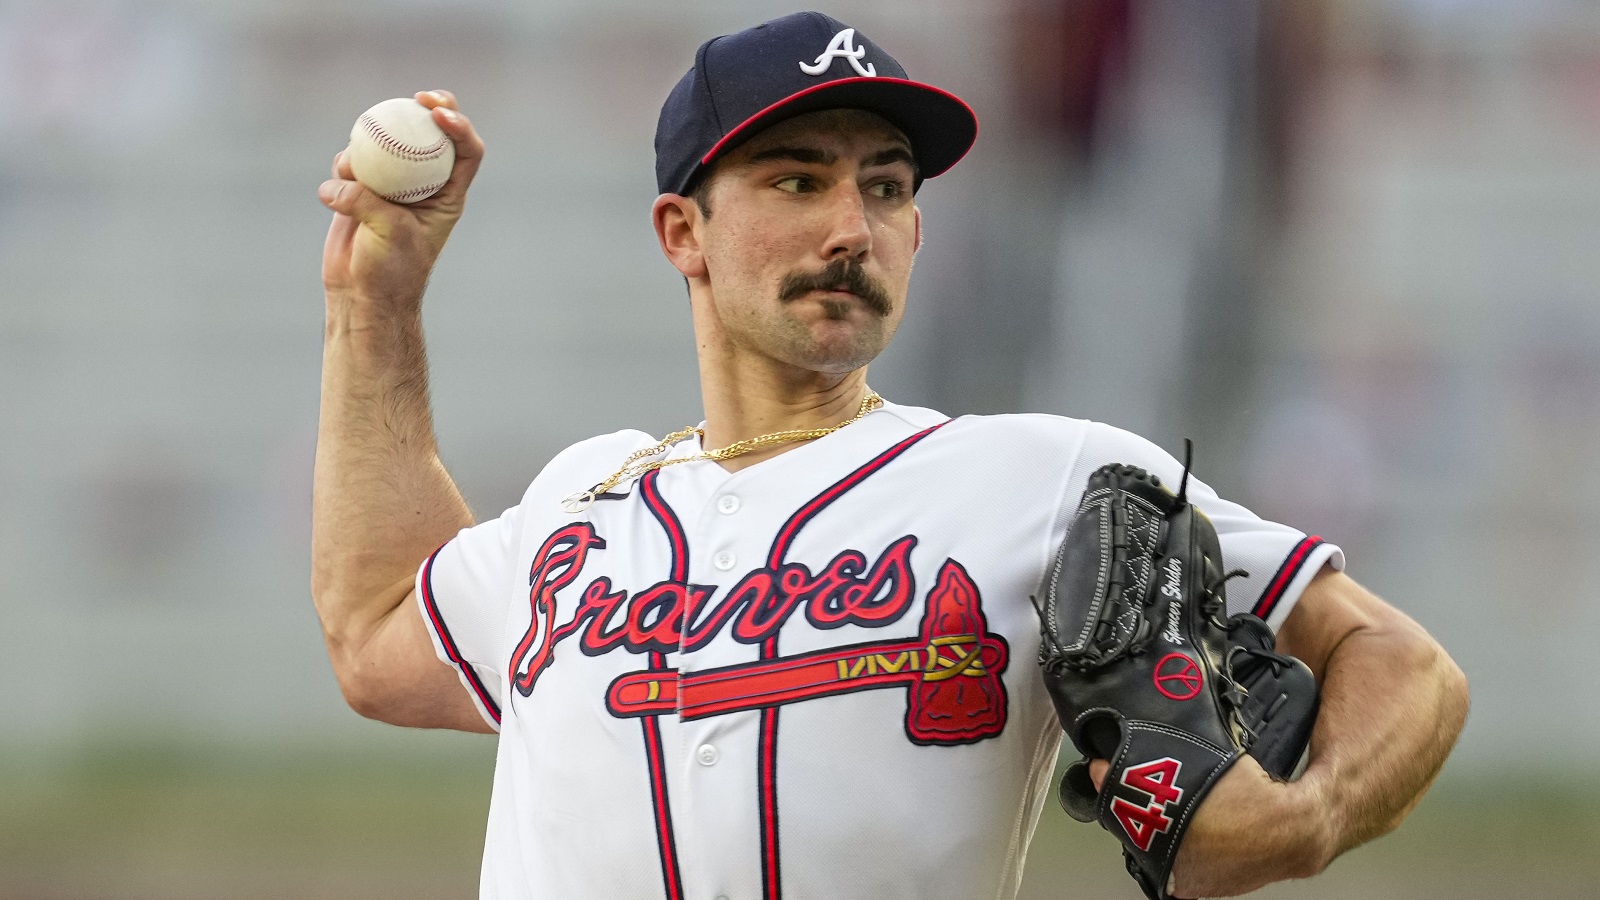 Braves pitcher has new 'Major League'-inspired jersey number